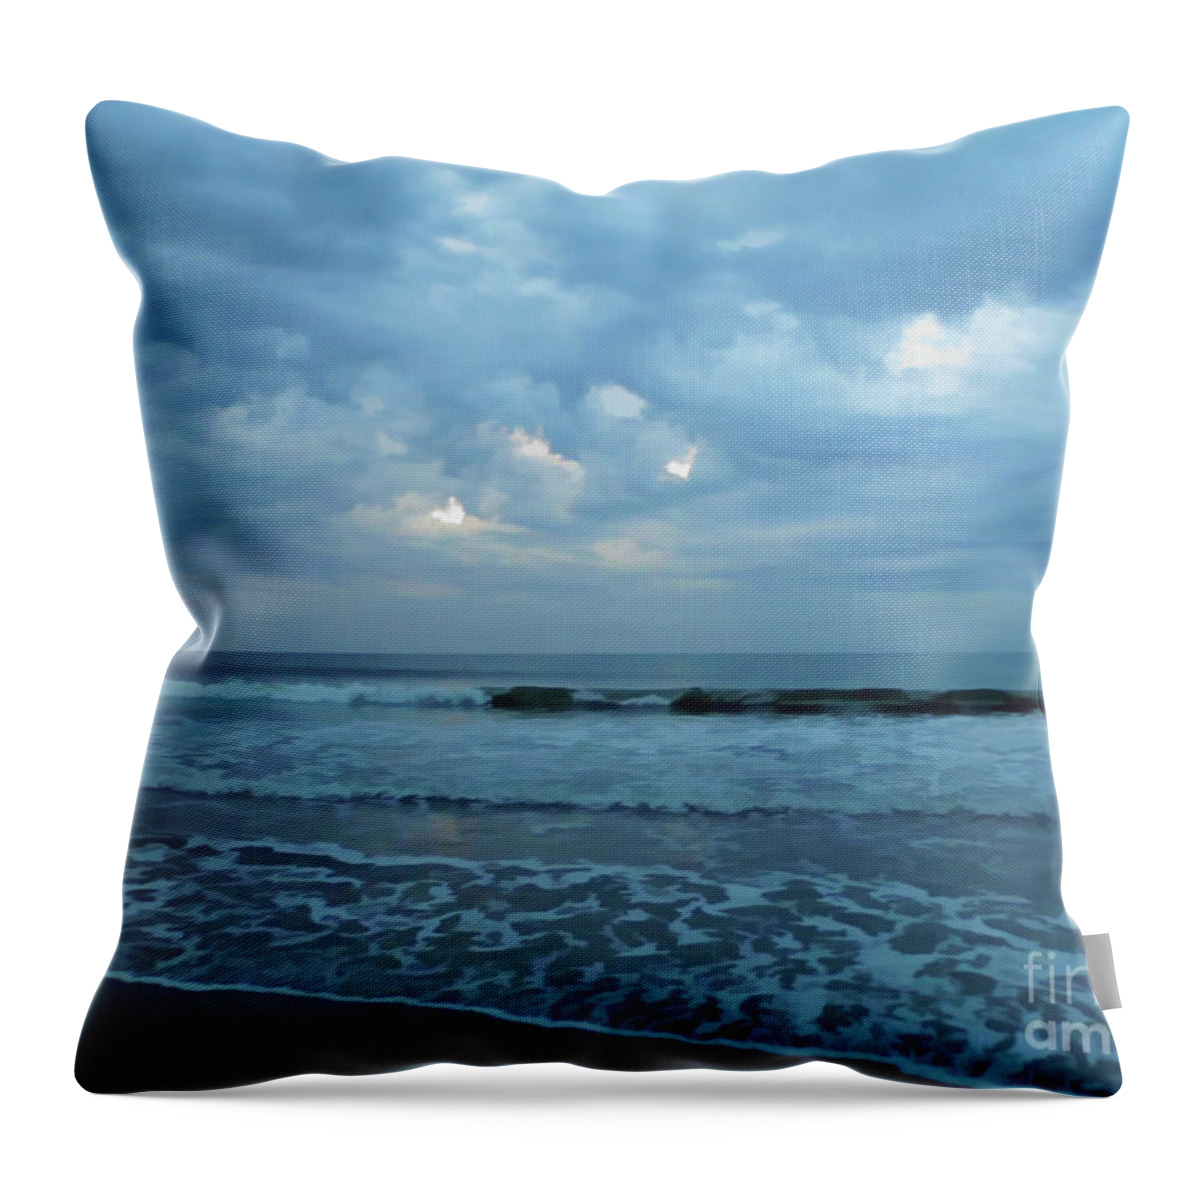 Sunrise Throw Pillow featuring the photograph Stormy Morning by D Hackett